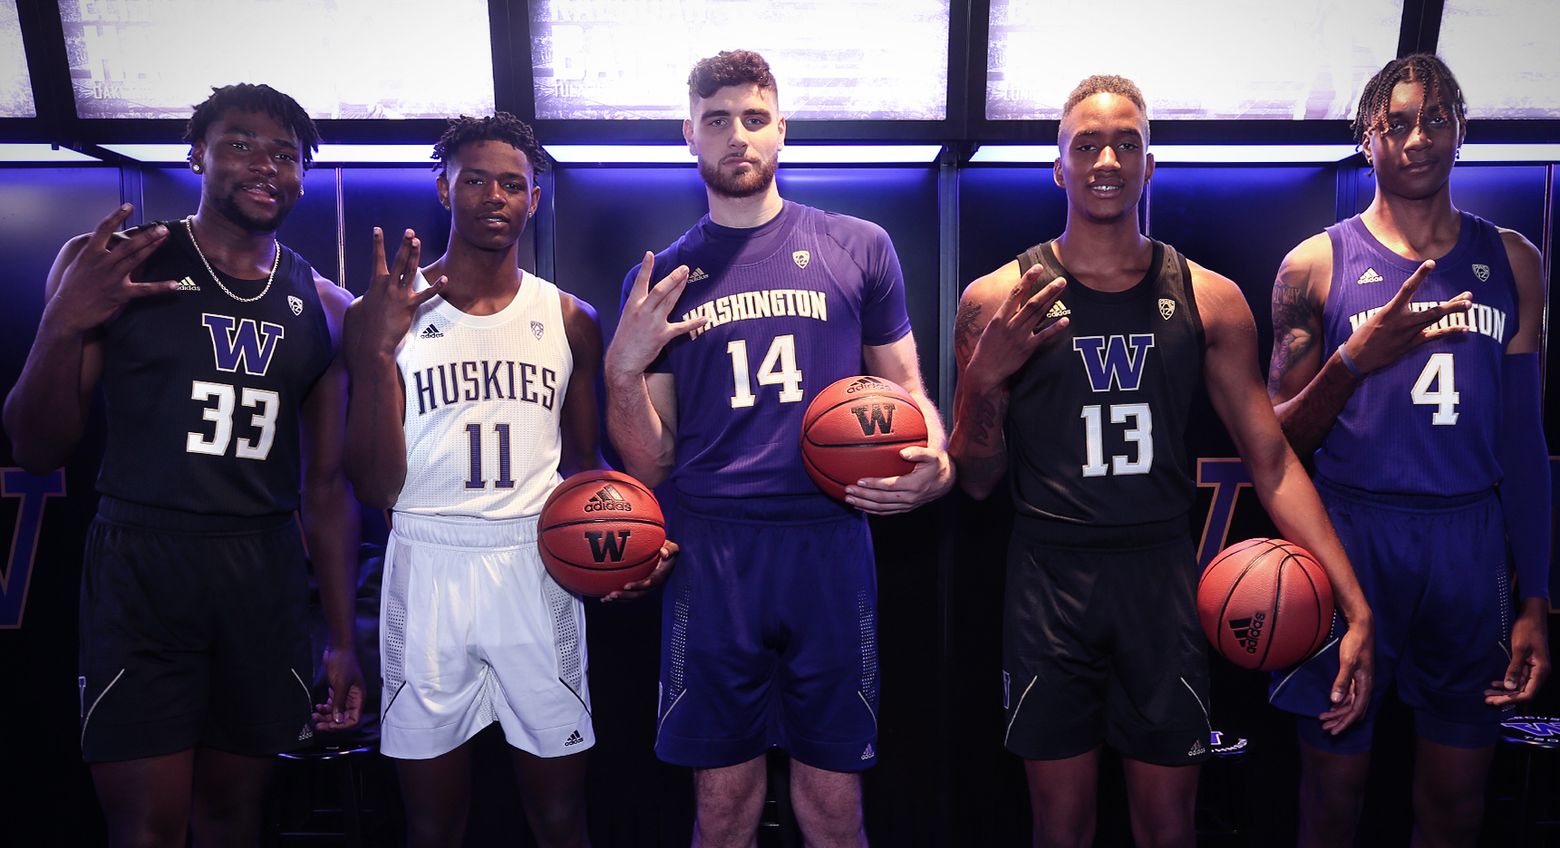 More Sleeved Basketball Uniforms Coming from adidas – SportsLogos